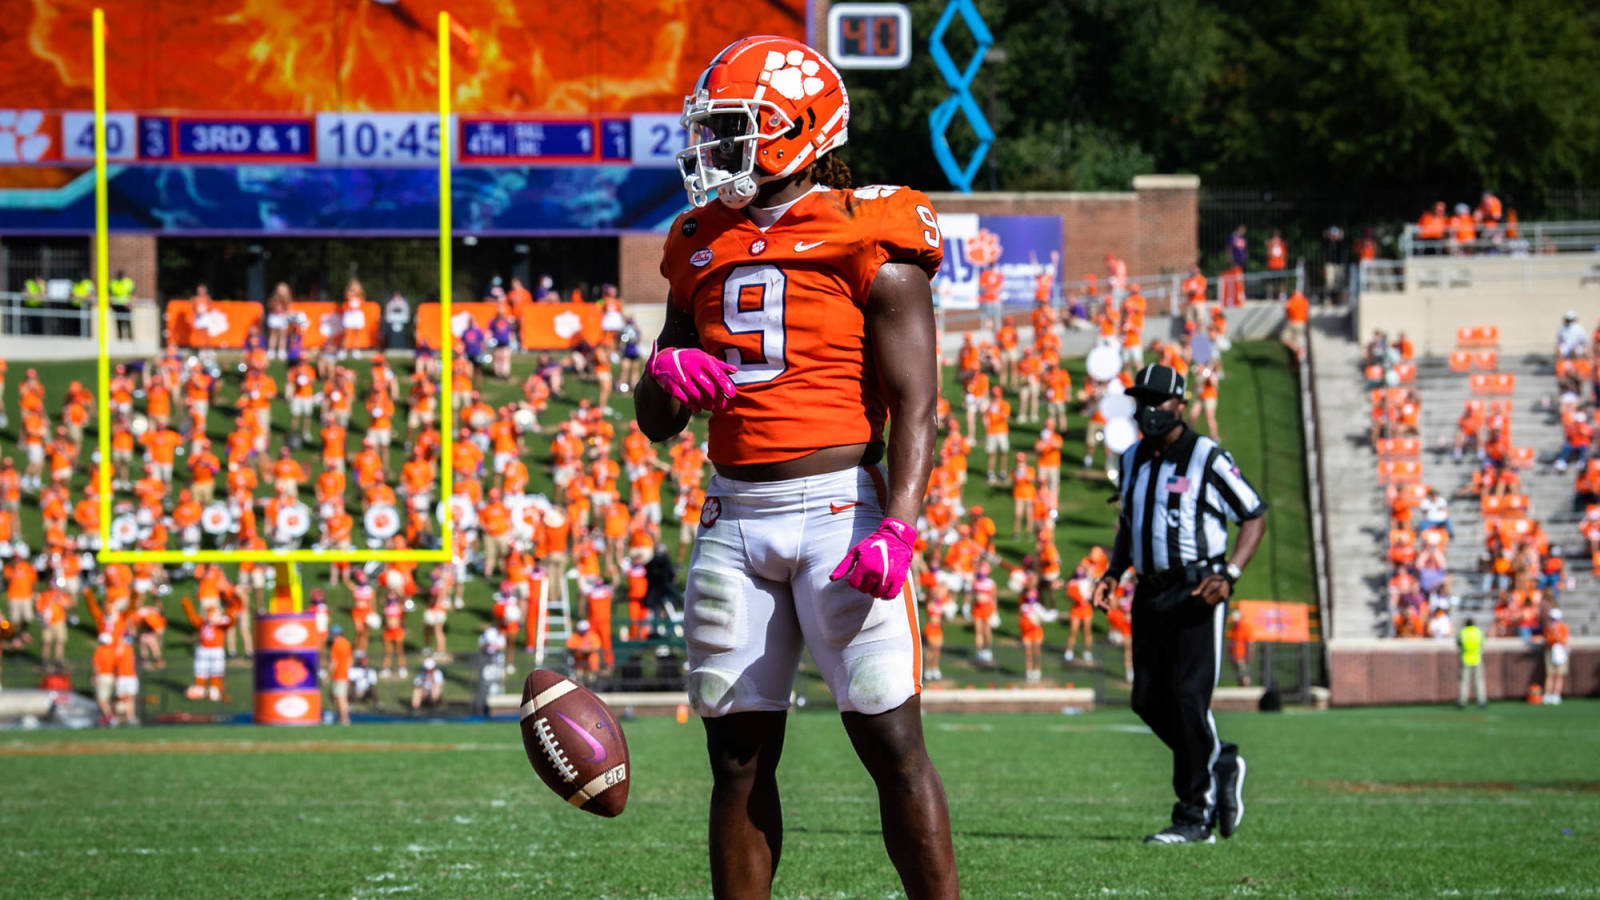 Travis etienne plans to beef up his breakfast after enduring cramps